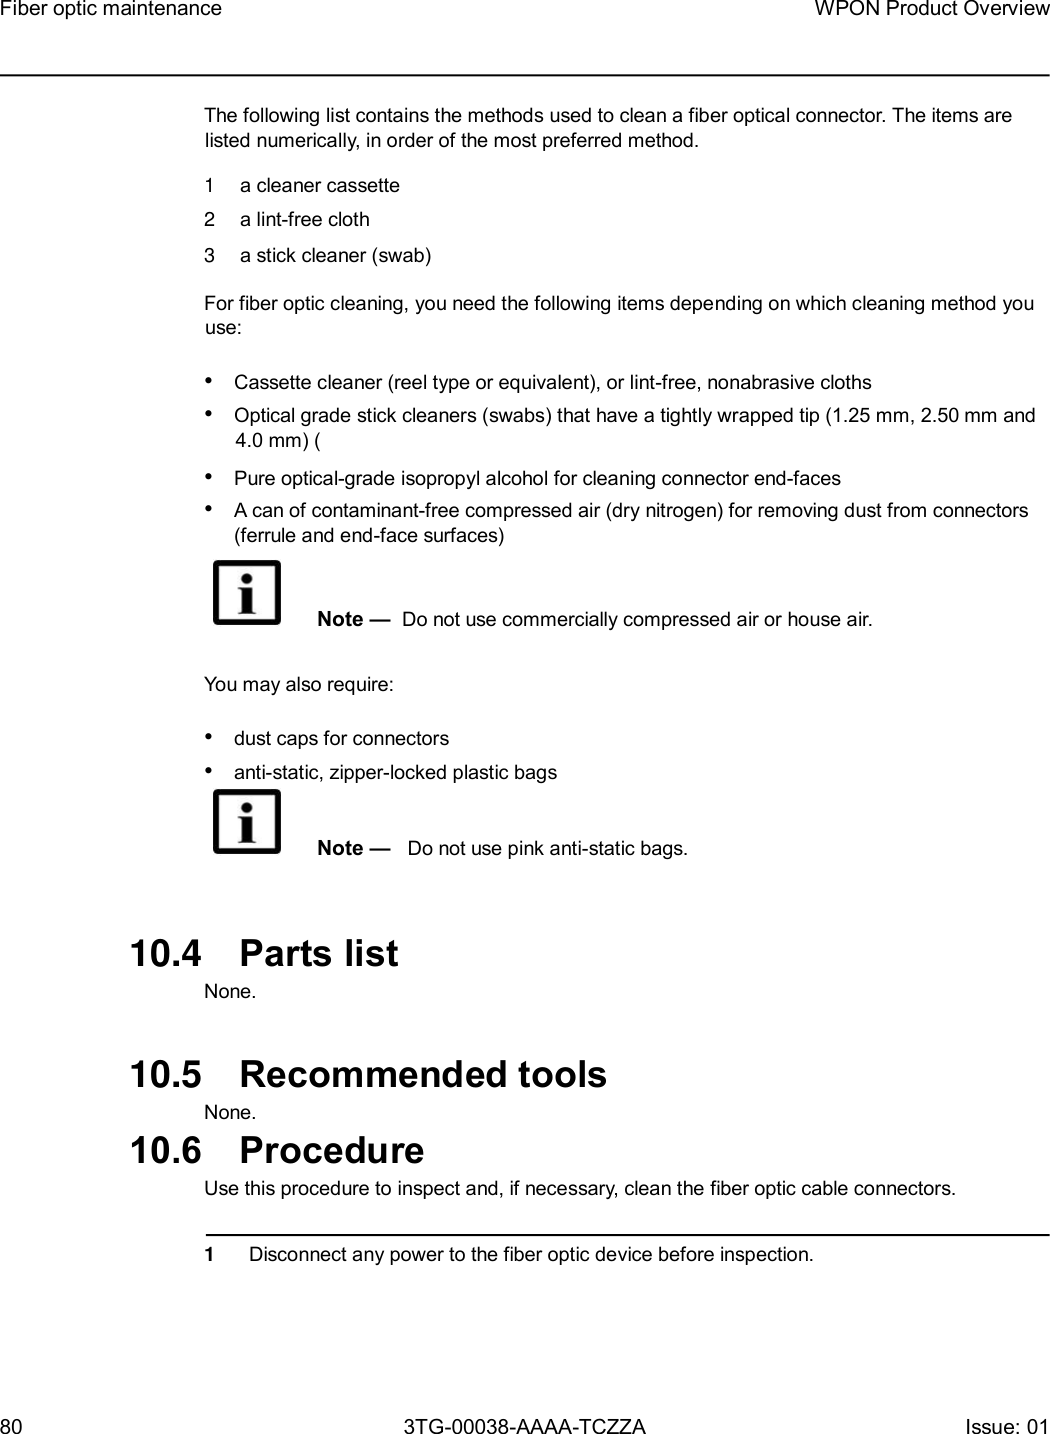 Page 80 of Nokia Bell 7577WPONAPAC WPON User Manual WPON Product Overview